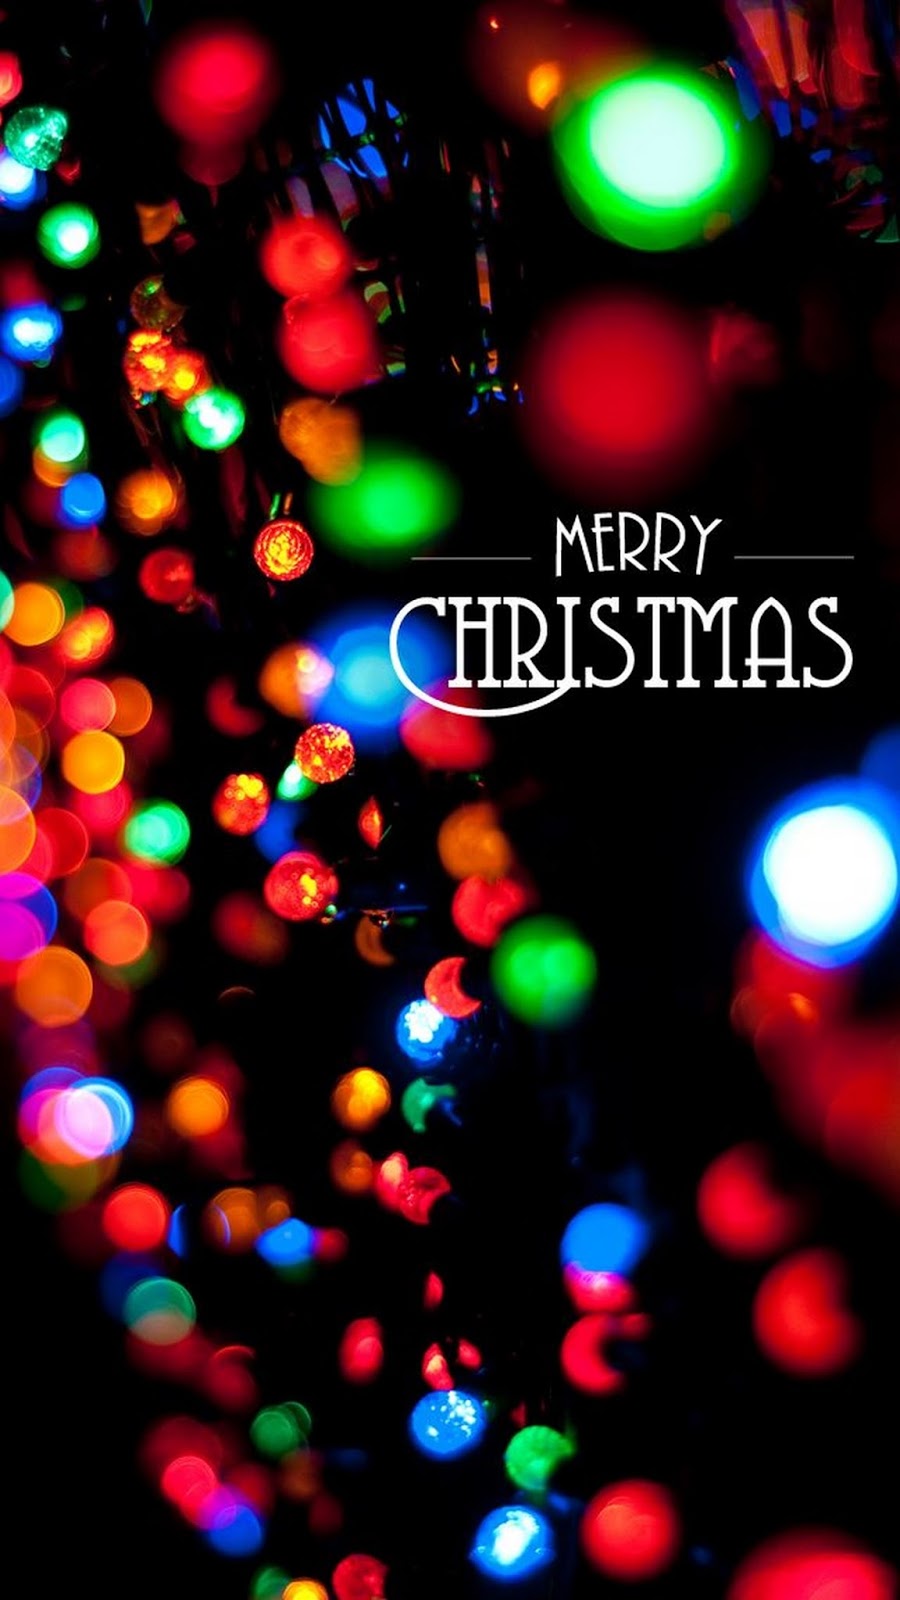 Cute Christmas Wallpaper For Iphone - Christmas Wallpaper Hd Phone - HD Wallpaper 